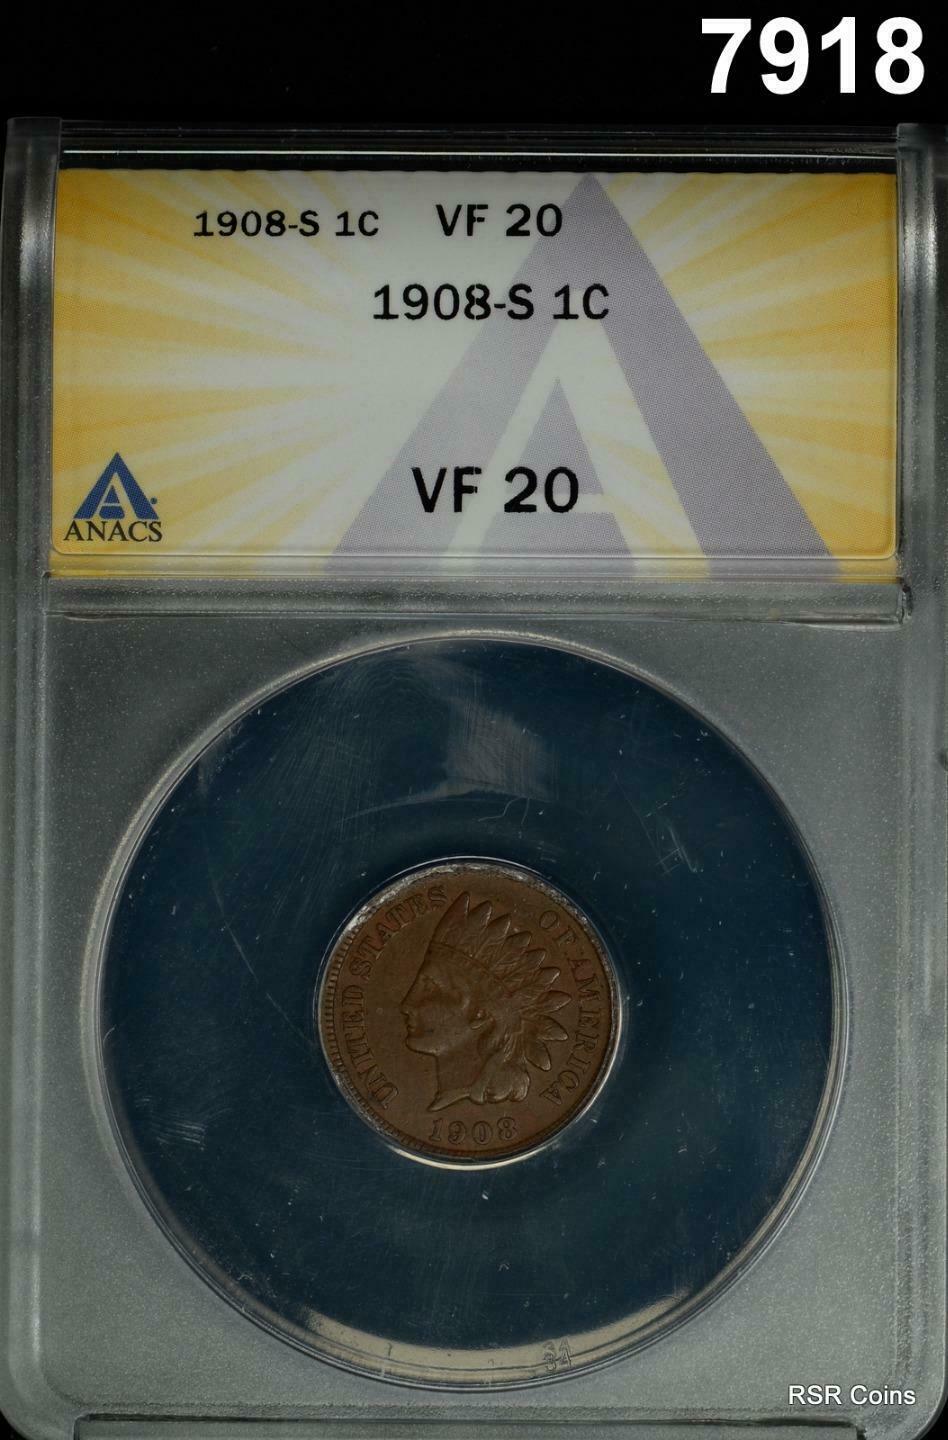 1908 S INDIAN HEAD CENT SCARCE DATE! ANACS CERTIFIED VF20! #7918